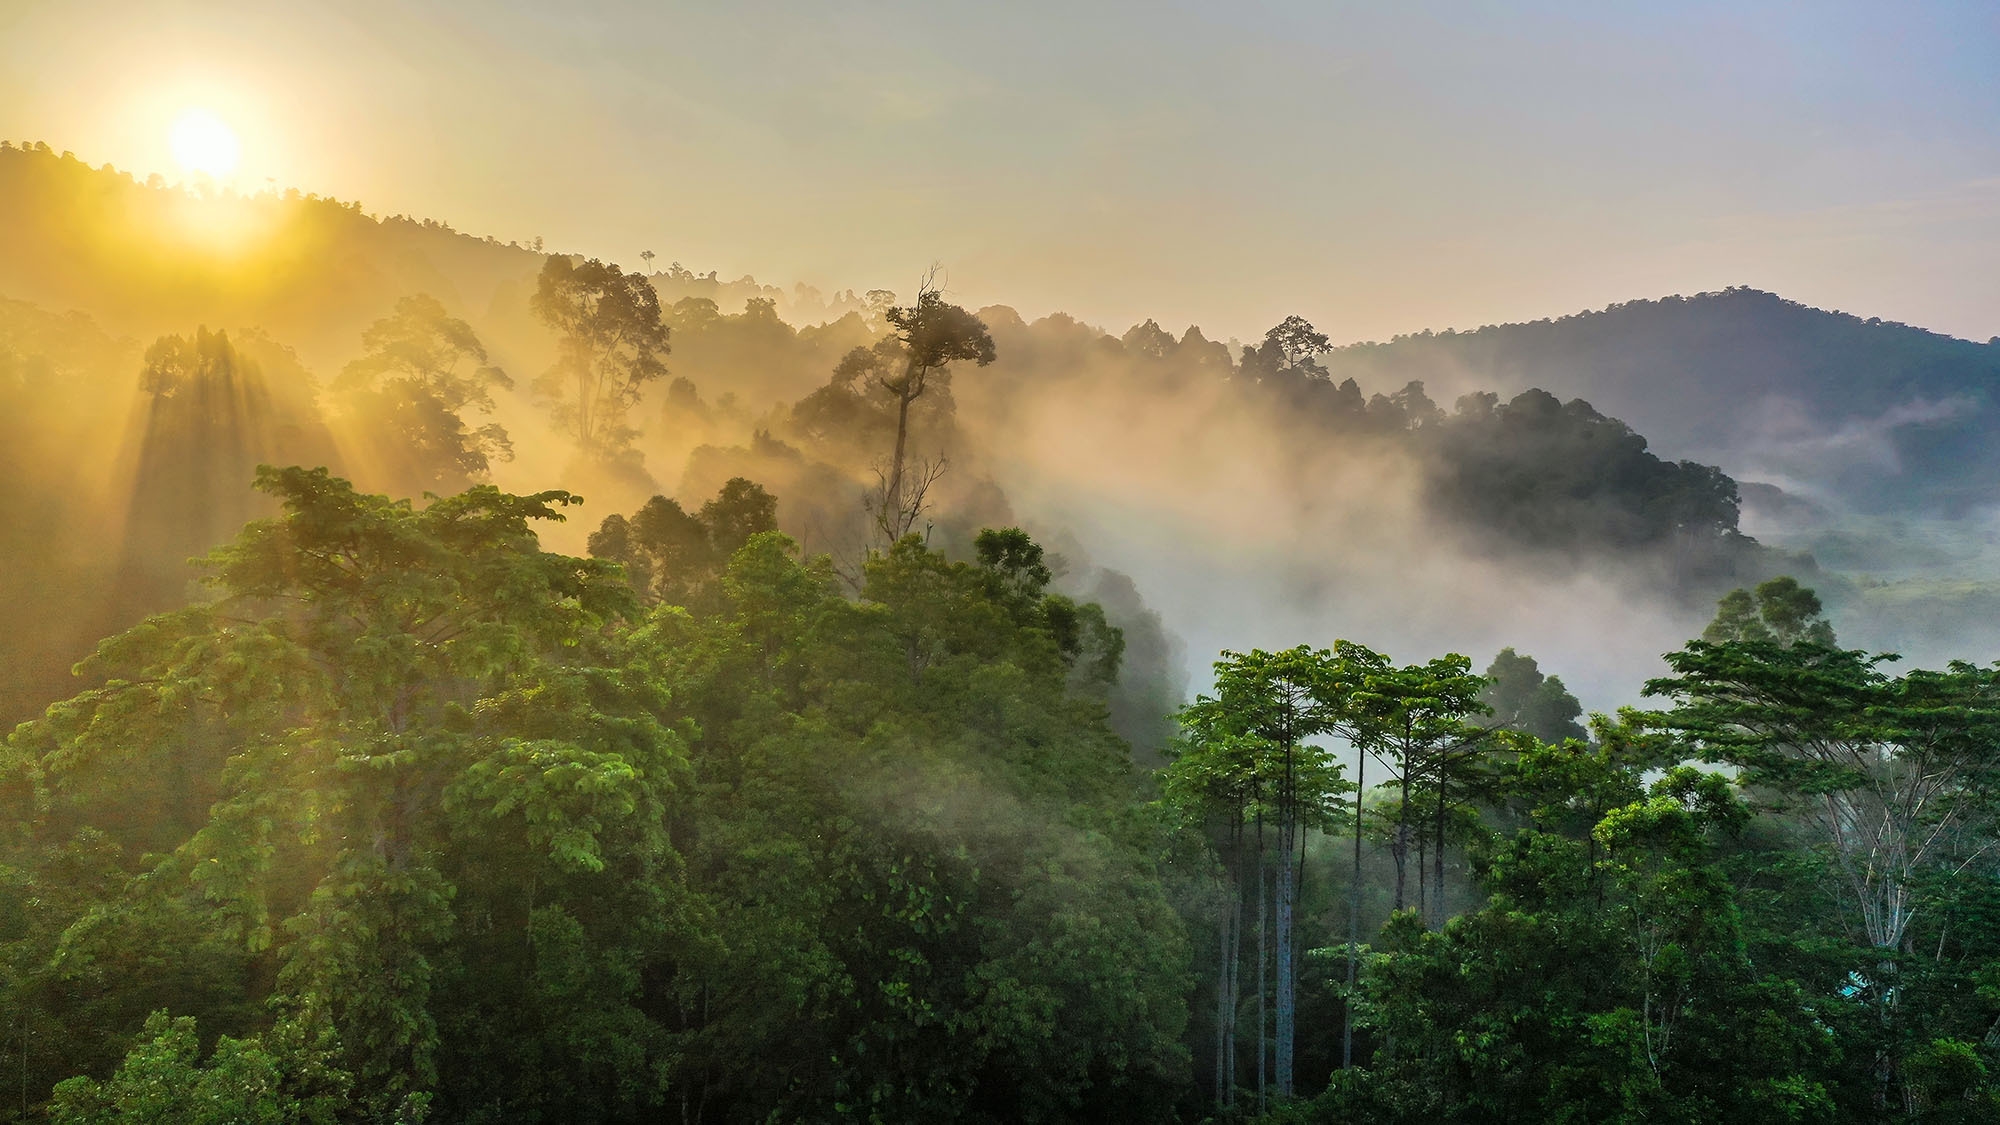 A misty view at sunset over a Borneo rainforest